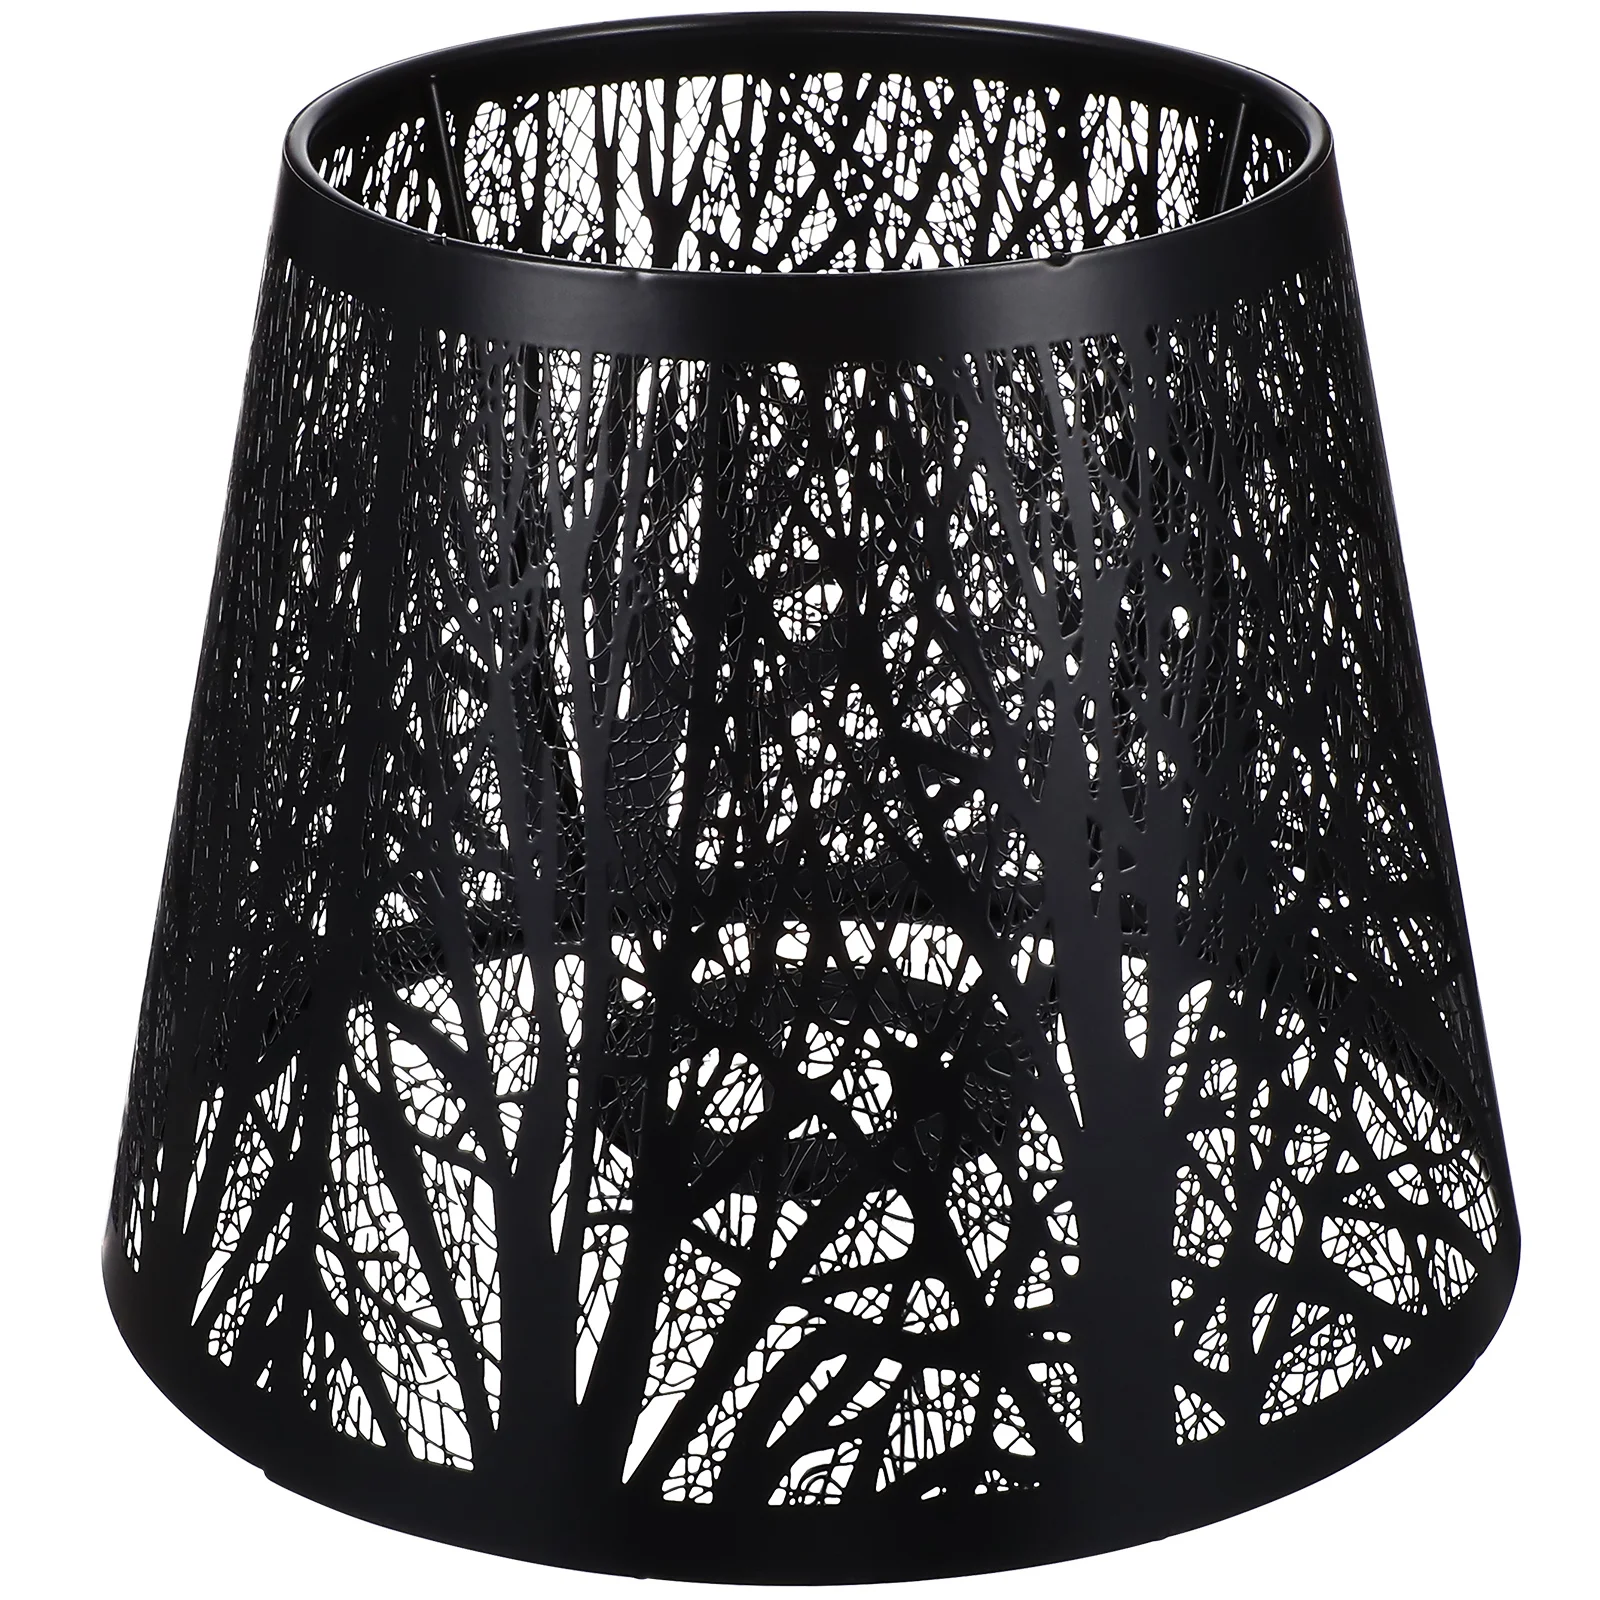 

Hollow Tree Shadow Lampshade Creative Modern Metal Ceiling Chandelier Light Cover Table Lamp Cover Replacement